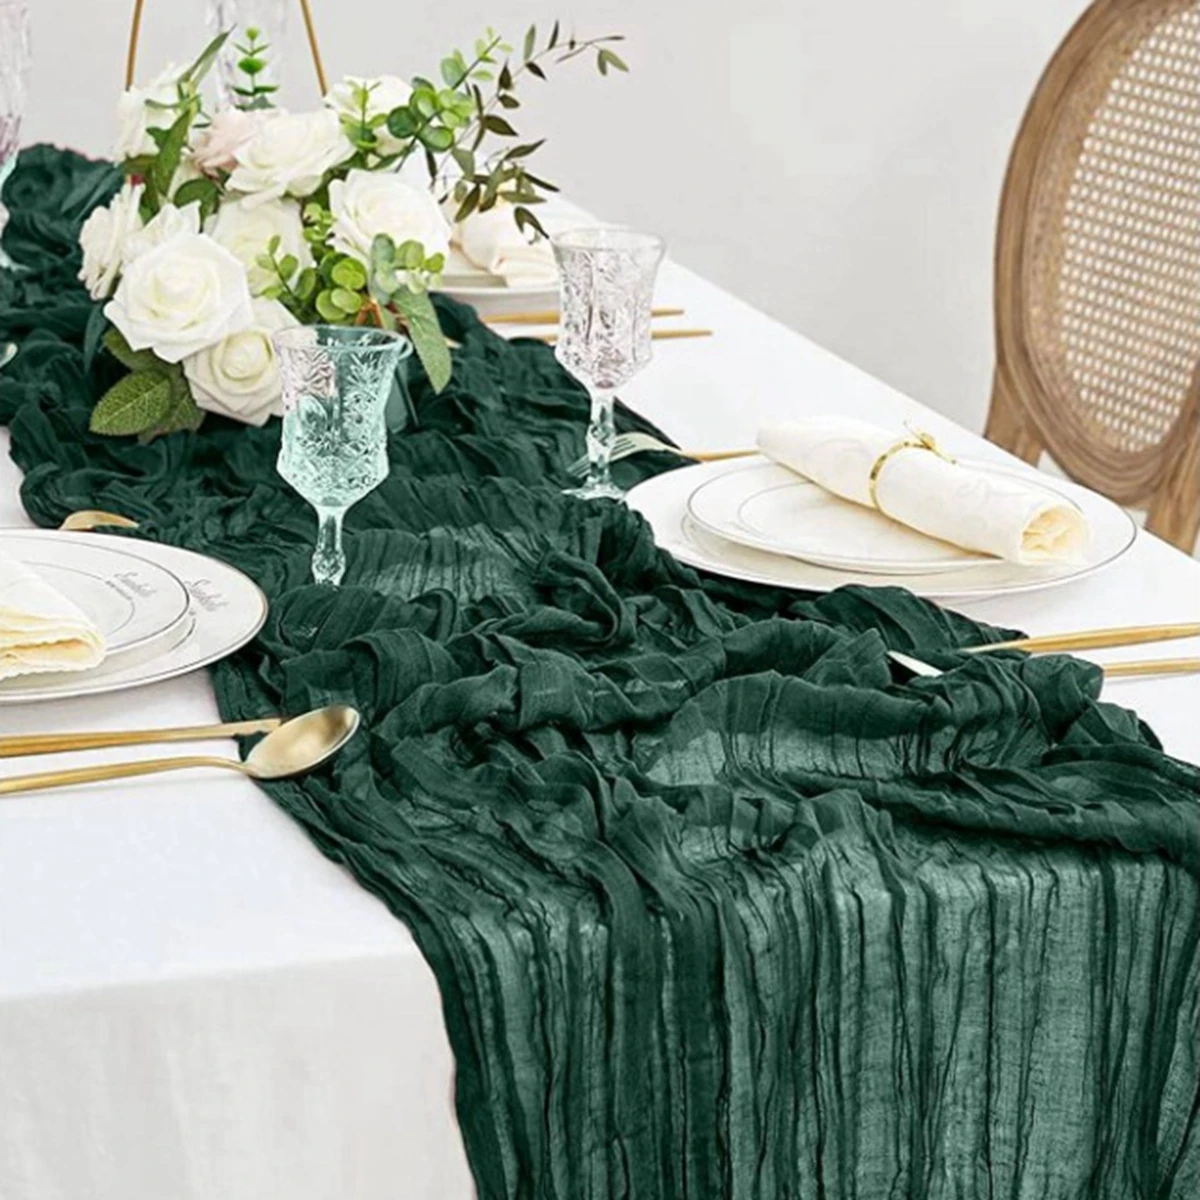 Green Gauze Table Runner Burlap Cheesecloth Table Setting Dining Rustic Country Wedding Birthday Decor Boho Table Linens